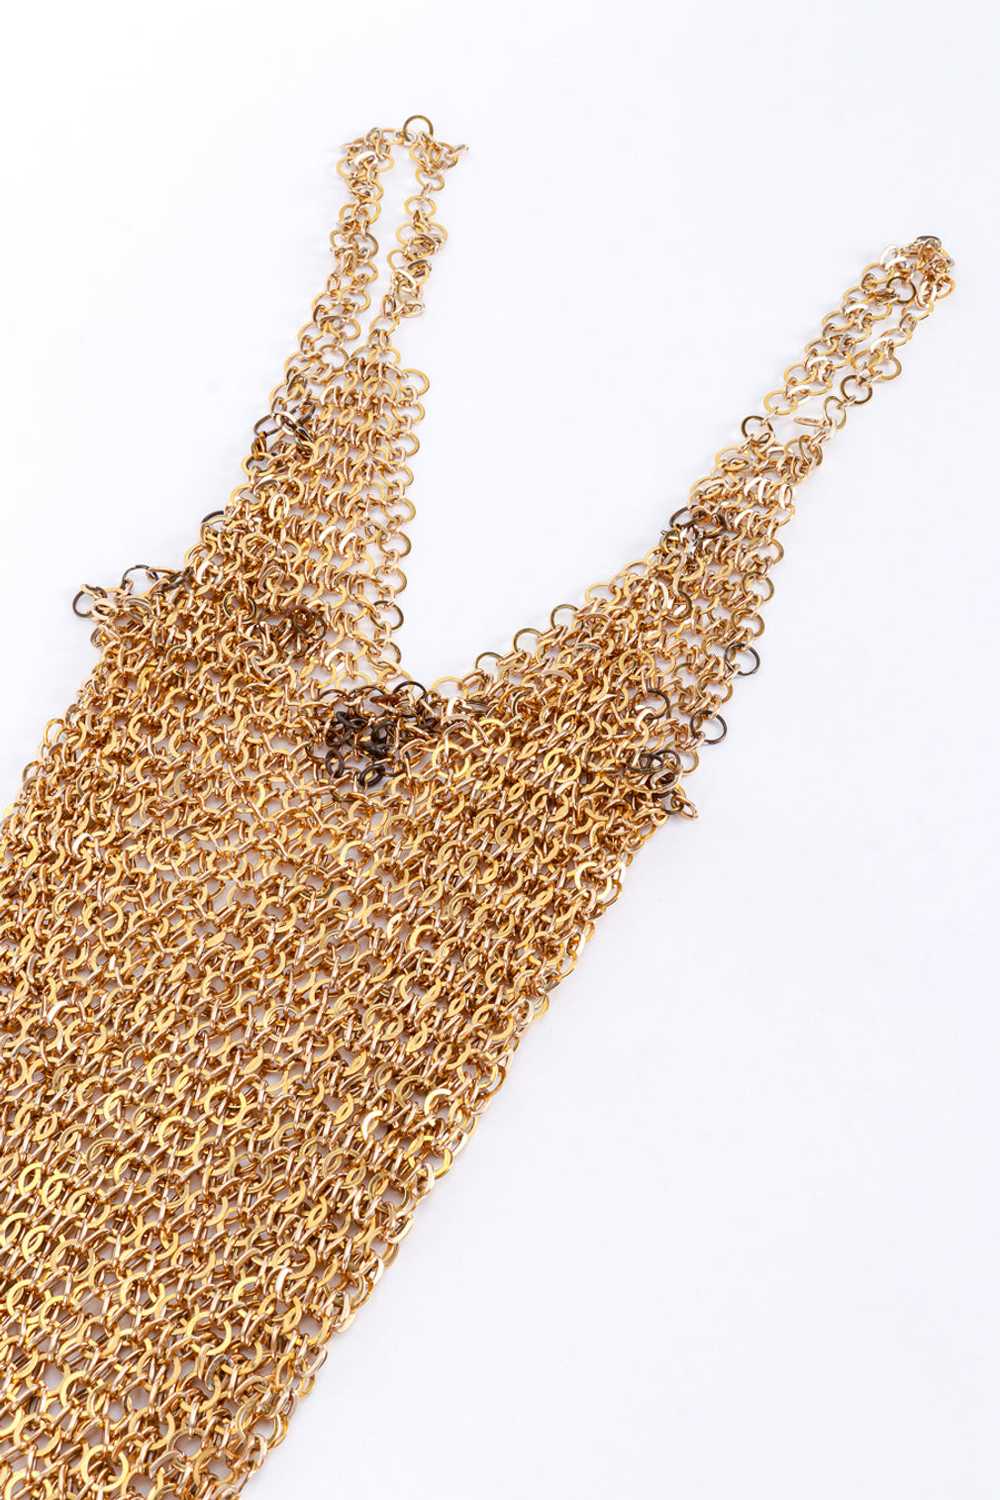 Ring Link Chain Dress - image 6